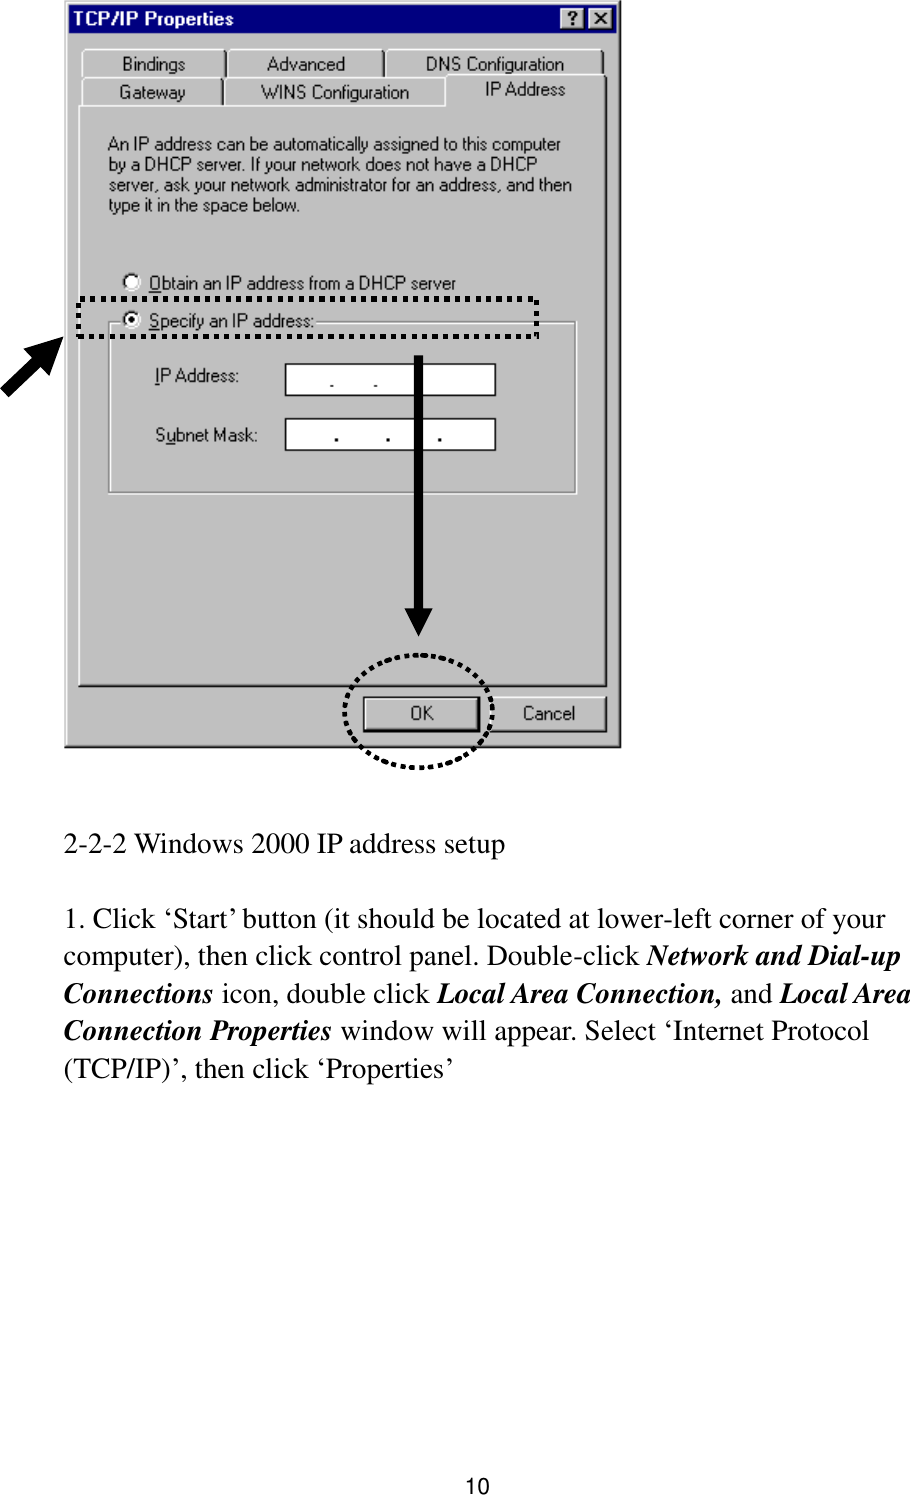 10    2-2-2 Windows 2000 IP address setup  1. Click „Start‟ button (it should be located at lower-left corner of your computer), then click control panel. Double-click Network and Dial-up Connections icon, double click Local Area Connection, and Local Area Connection Properties window will appear. Select „Internet Protocol (TCP/IP)‟, then click „Properties‟    